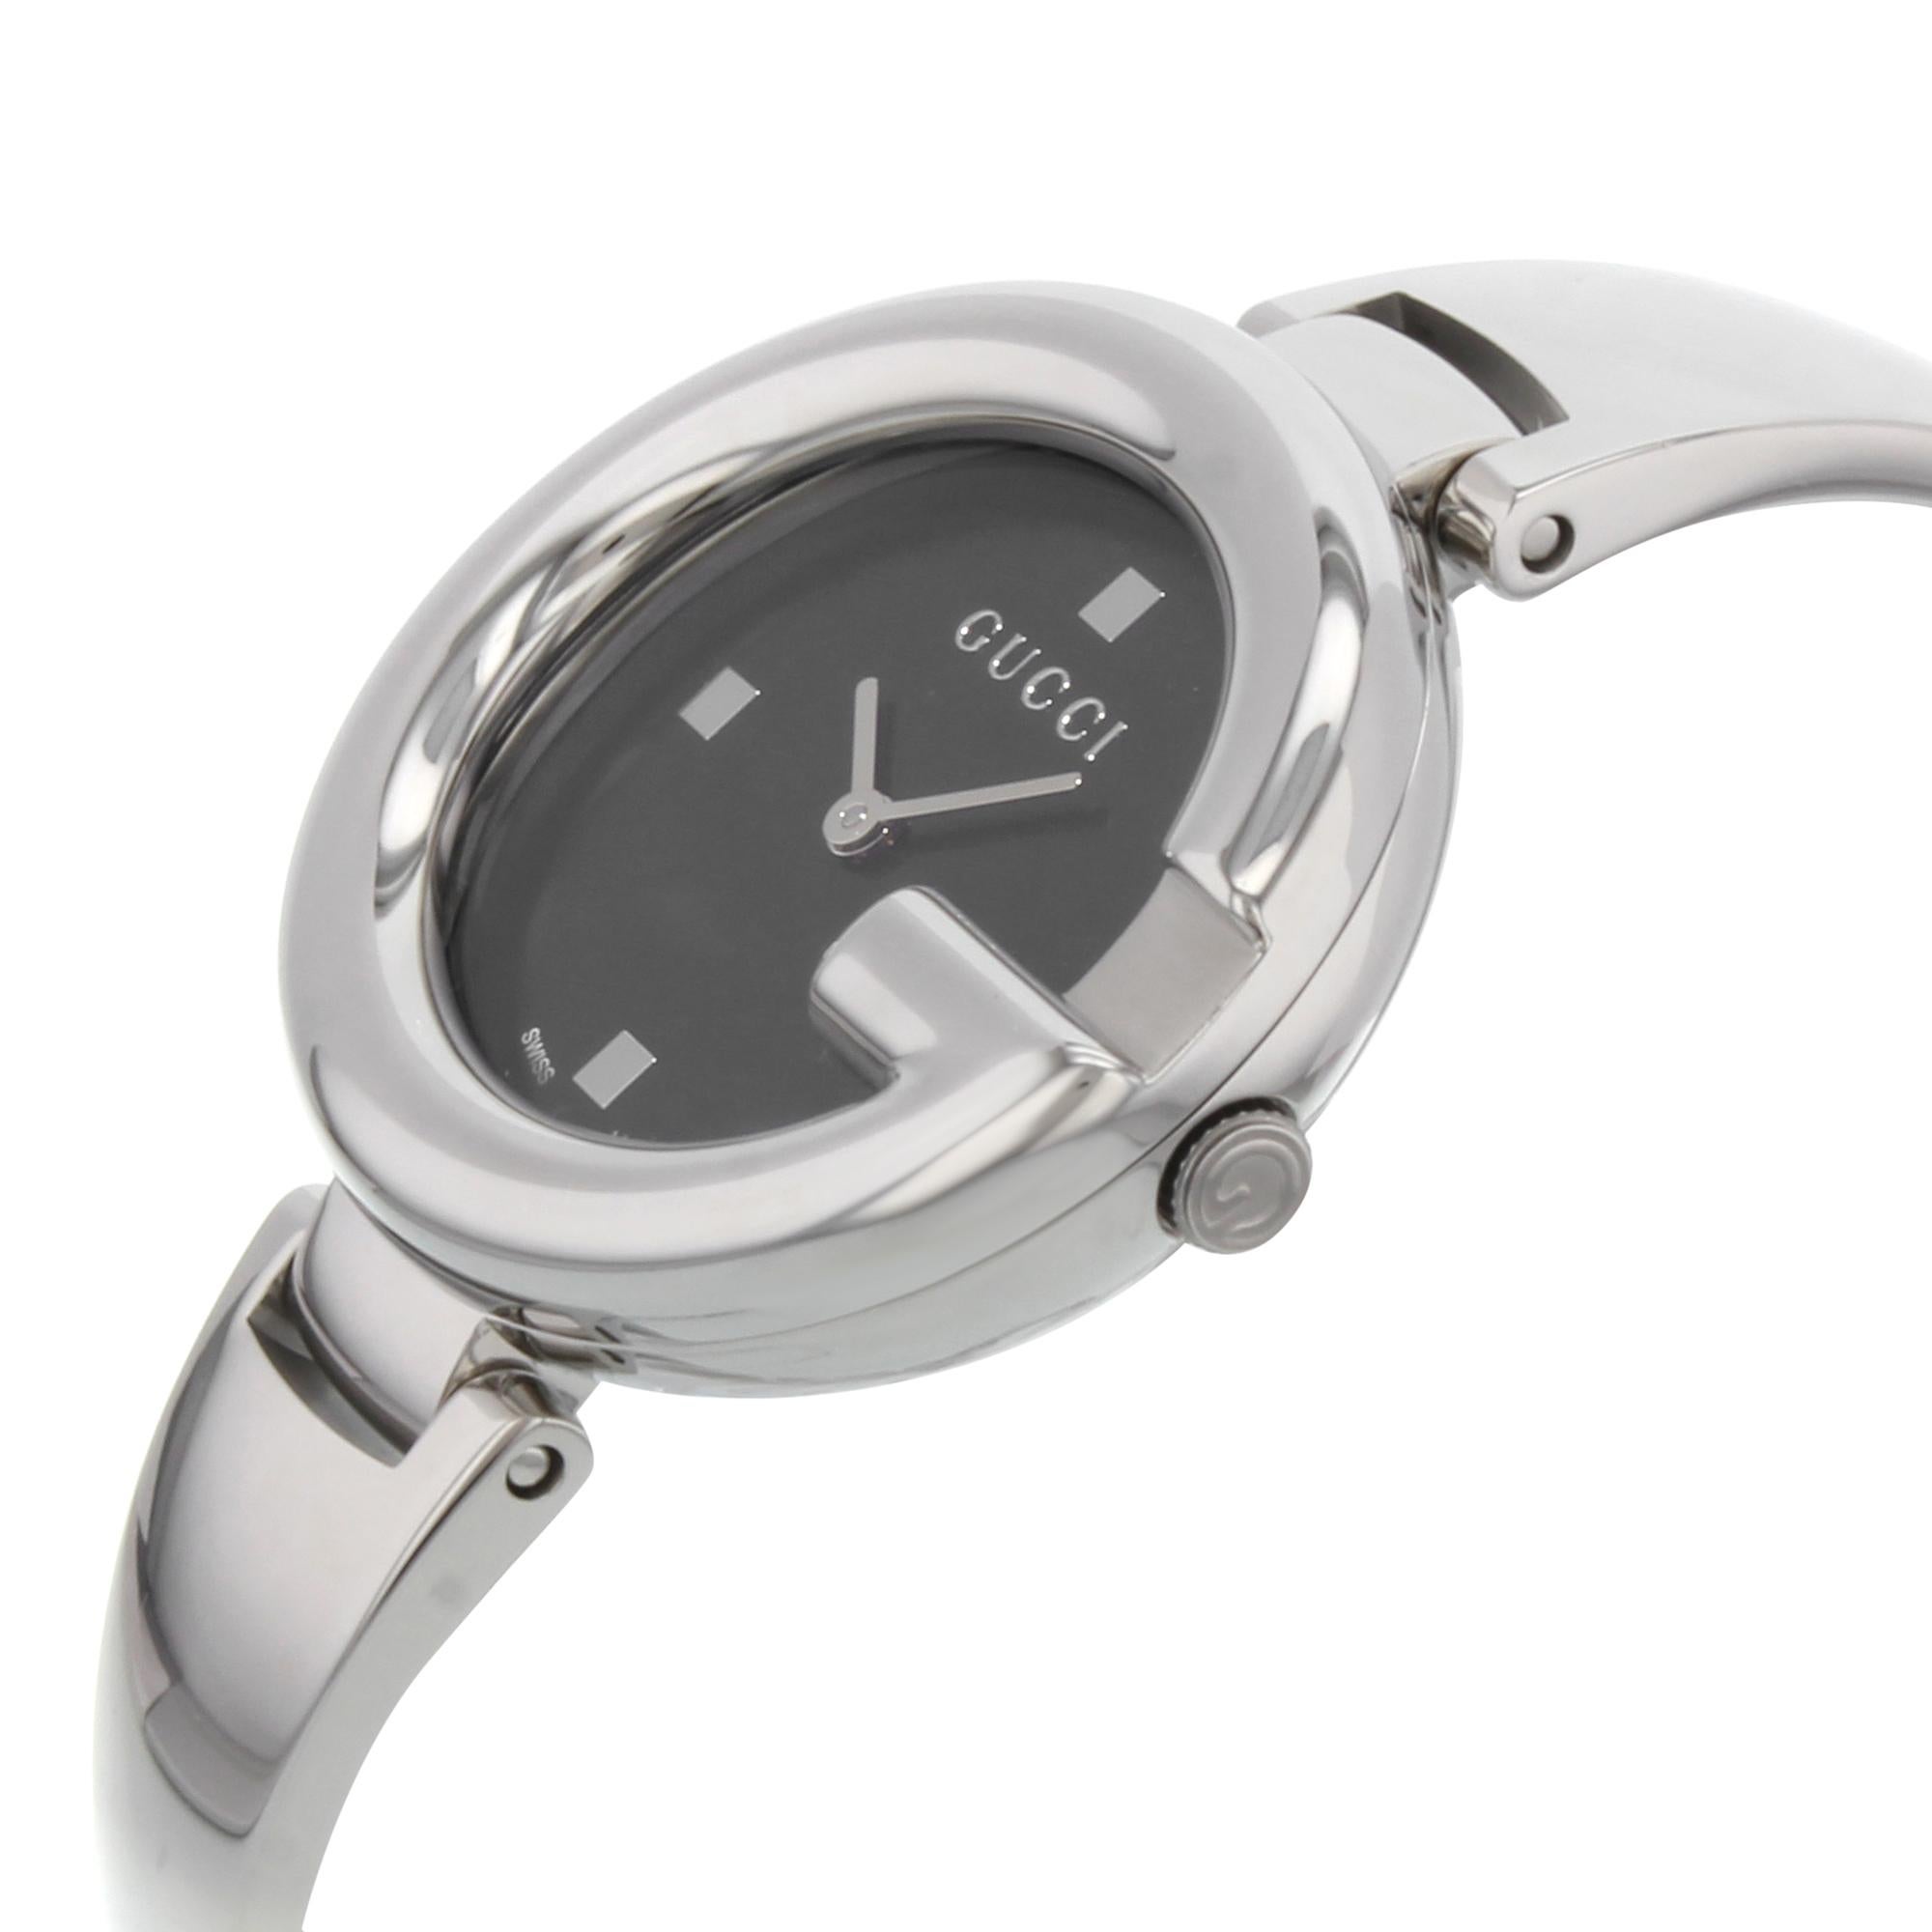 This display model Gucci Guccissima  YA134301  is a beautiful Ladie's timepiece that is powered by quartz (battery) movement which is cased in a stainless steel case. It has a oval shape face, no features dial and has hand dots style markers. It is